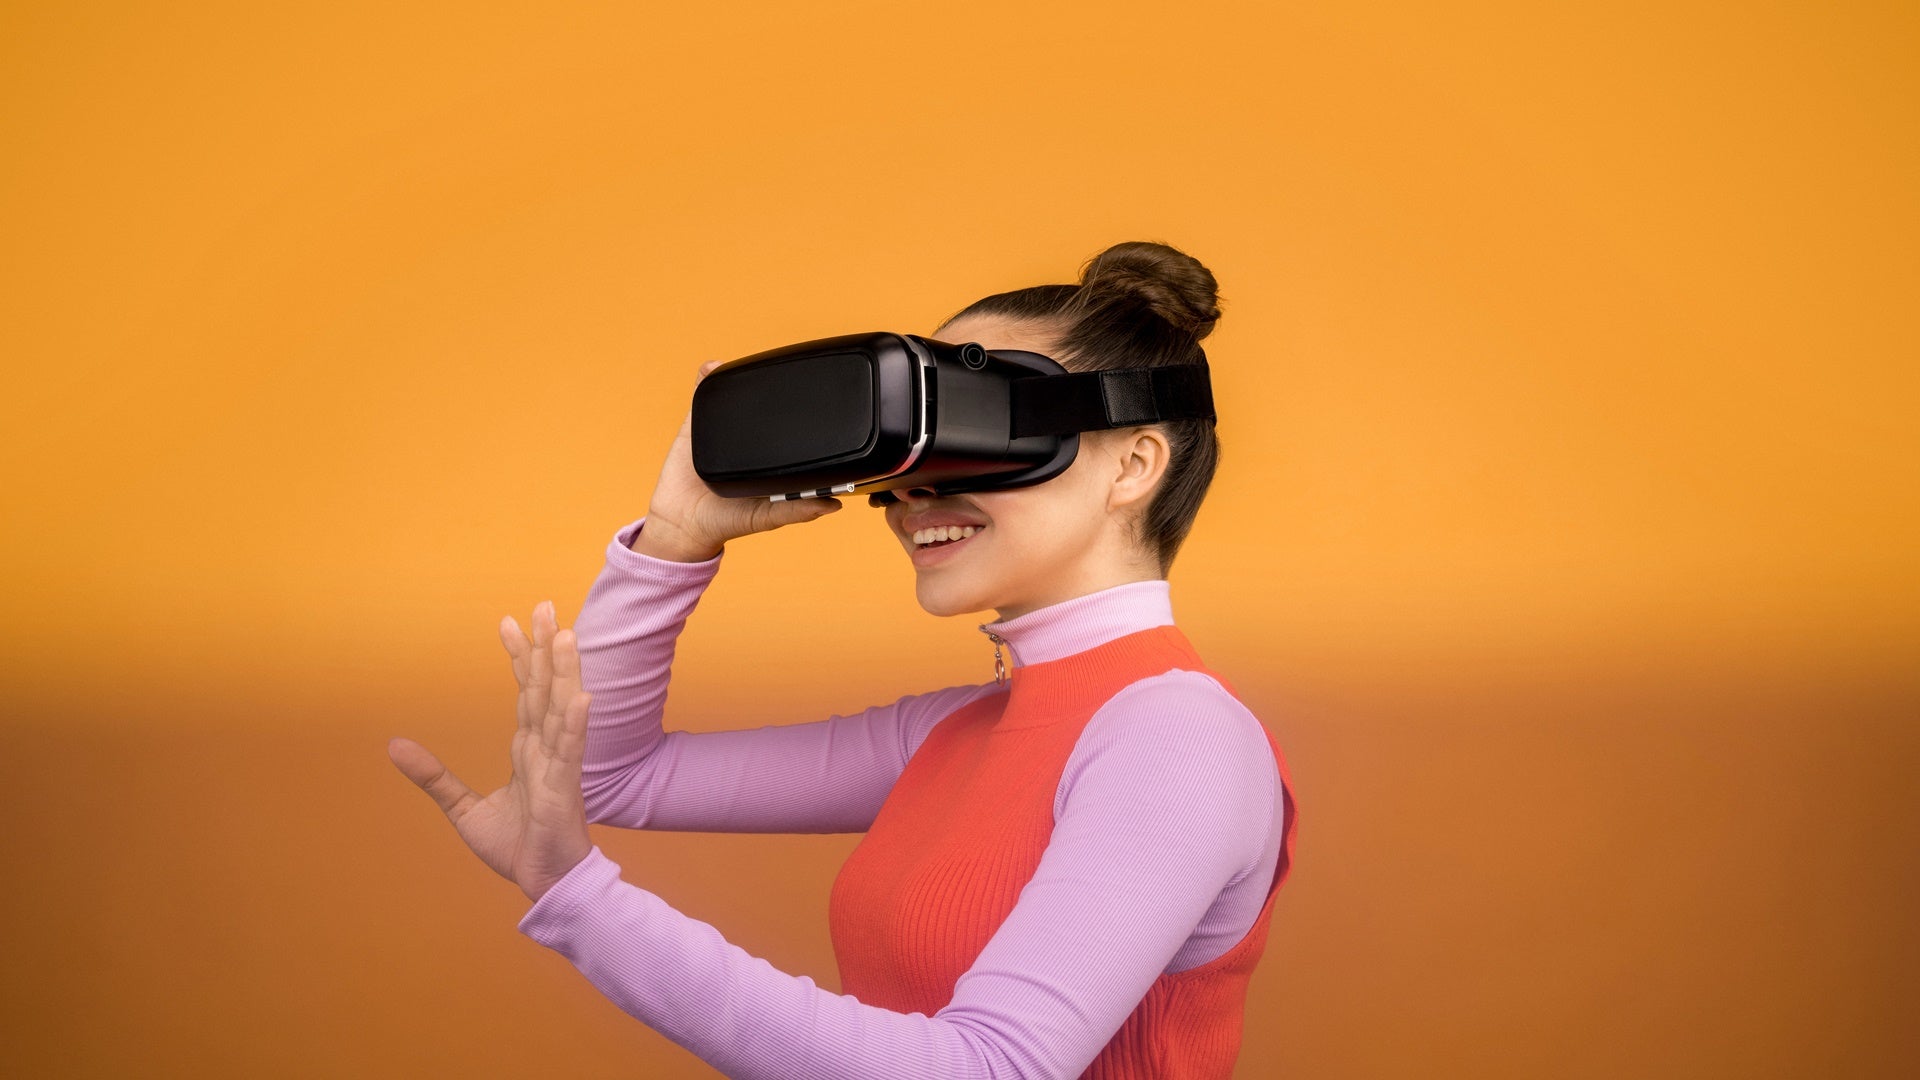 metaverse, VR, lady wearing a VR headset